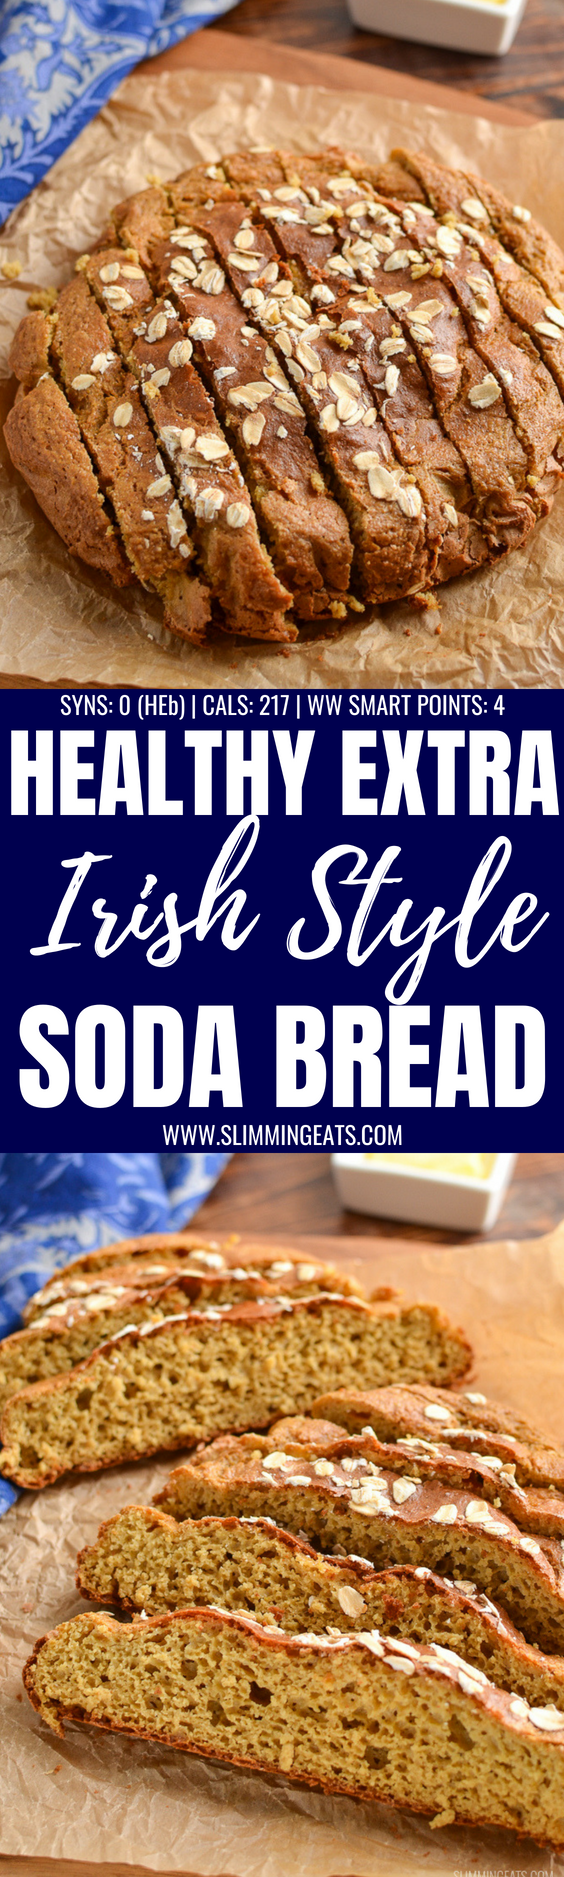 Healthy Extra Gluten Free Soda Bread - the perfect side for all your favourite soups, stews and casseroles.| gluten free, vegetarian, Slimming World and Weight Watchers friendly